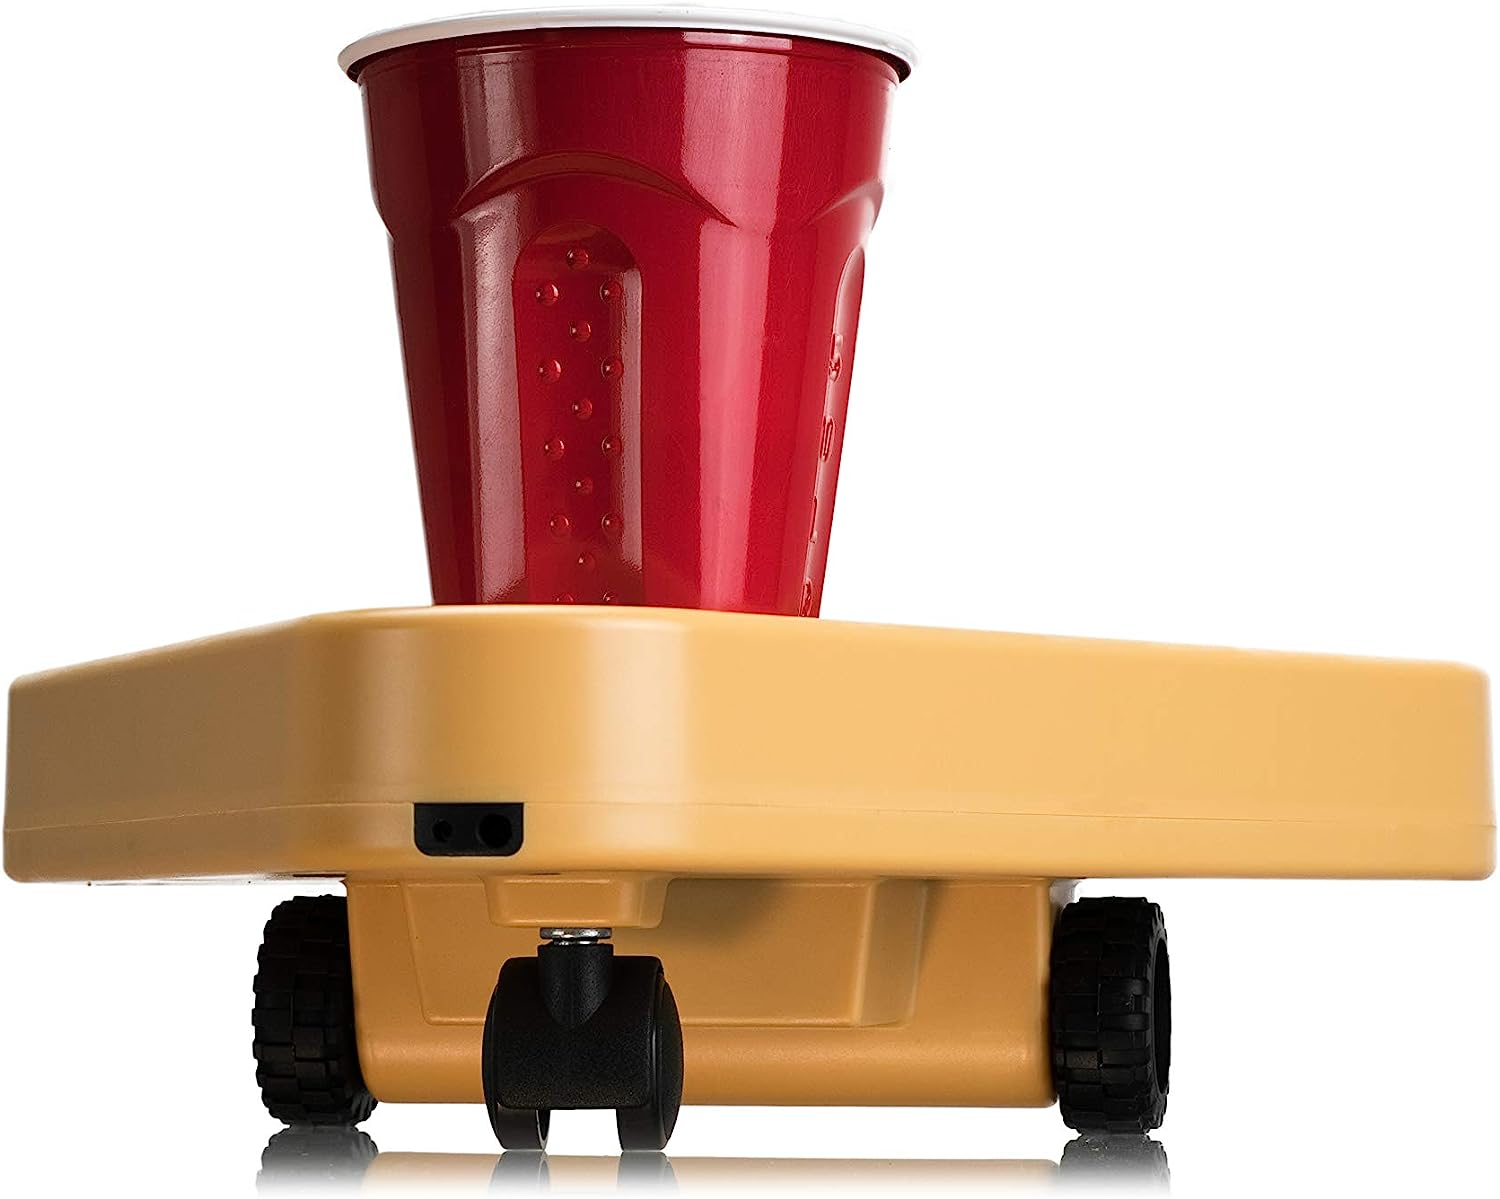 BRUU Moving Beer Pong Robot - A small robot that adds excitement to your beer pong games. It drives around the table, making the cups a moving target. Custom sensors ensure it stays on track without falling off or hitting anything. Easy to use - just add cups, fill them up, and turn it on. Let the good times roll! This model offers 3 different speeds. Each box contains 1 robot, 2 ping pong balls, and a quick start guide. Spice up your traditional beer pong matches with this innovative invention.